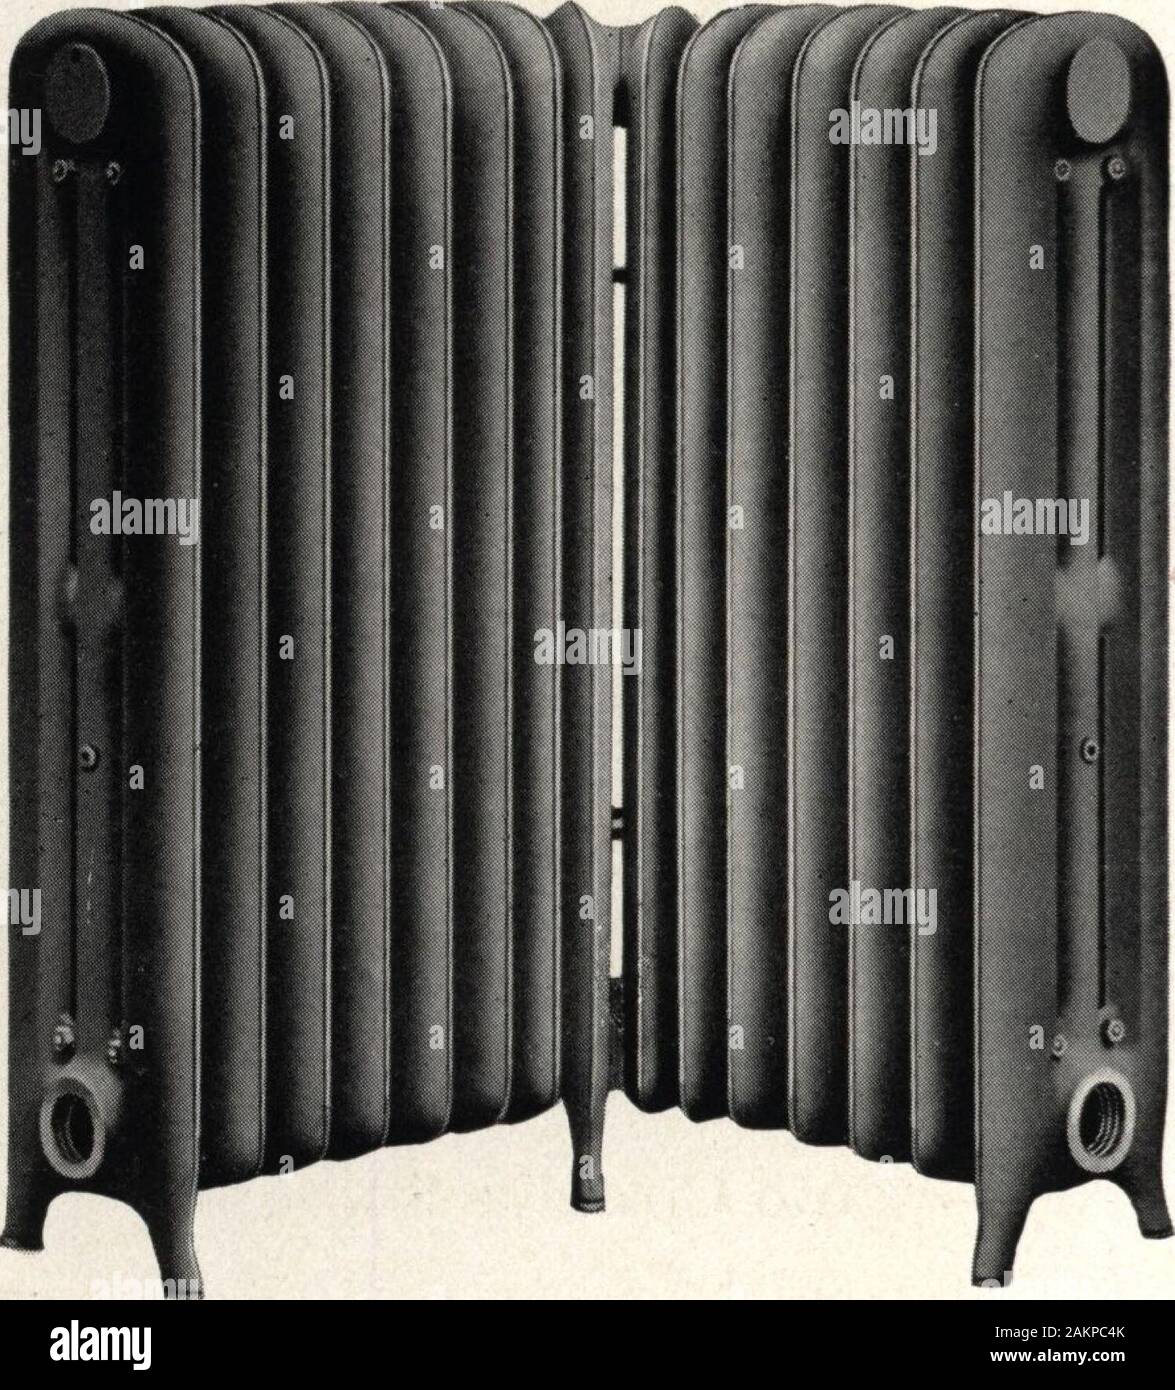 National boilers, radiators, and specialties: catalog no26 . Concealed Brackets for Premo Radiators Dimensions Single-Column.Two-Column...Three-Column.Four-Column. Top—In. A B C 3 7/8 2H 314 ;)?* 2H 4=*, .);s 2, 4!„ &gt;!s 2lA 4 „; Dimension—G—Inches 45 38 32 26 23 22 20 18 35&lt;K30 H 30 29 a30^ 24 23 &lt;s 24 1 ,24 h 18 17 K 18 H 15 14 Ti 14K 14 is Bottom-In. Dimension—H—Inches Dimensions D 4J-4 777 E 2?22J22 42M F 31, 4»4 5 :5 : 7M 45 40 H41 41H 38 34 3483535 H 32 282S 1 s2929 H 26 22 22.i,s2323 H 23 1919 Vs 22 20 1616K 18 Single-Column Two-Column Three-Column Four-Column 1919 X 15*15H • •• Stock Photo